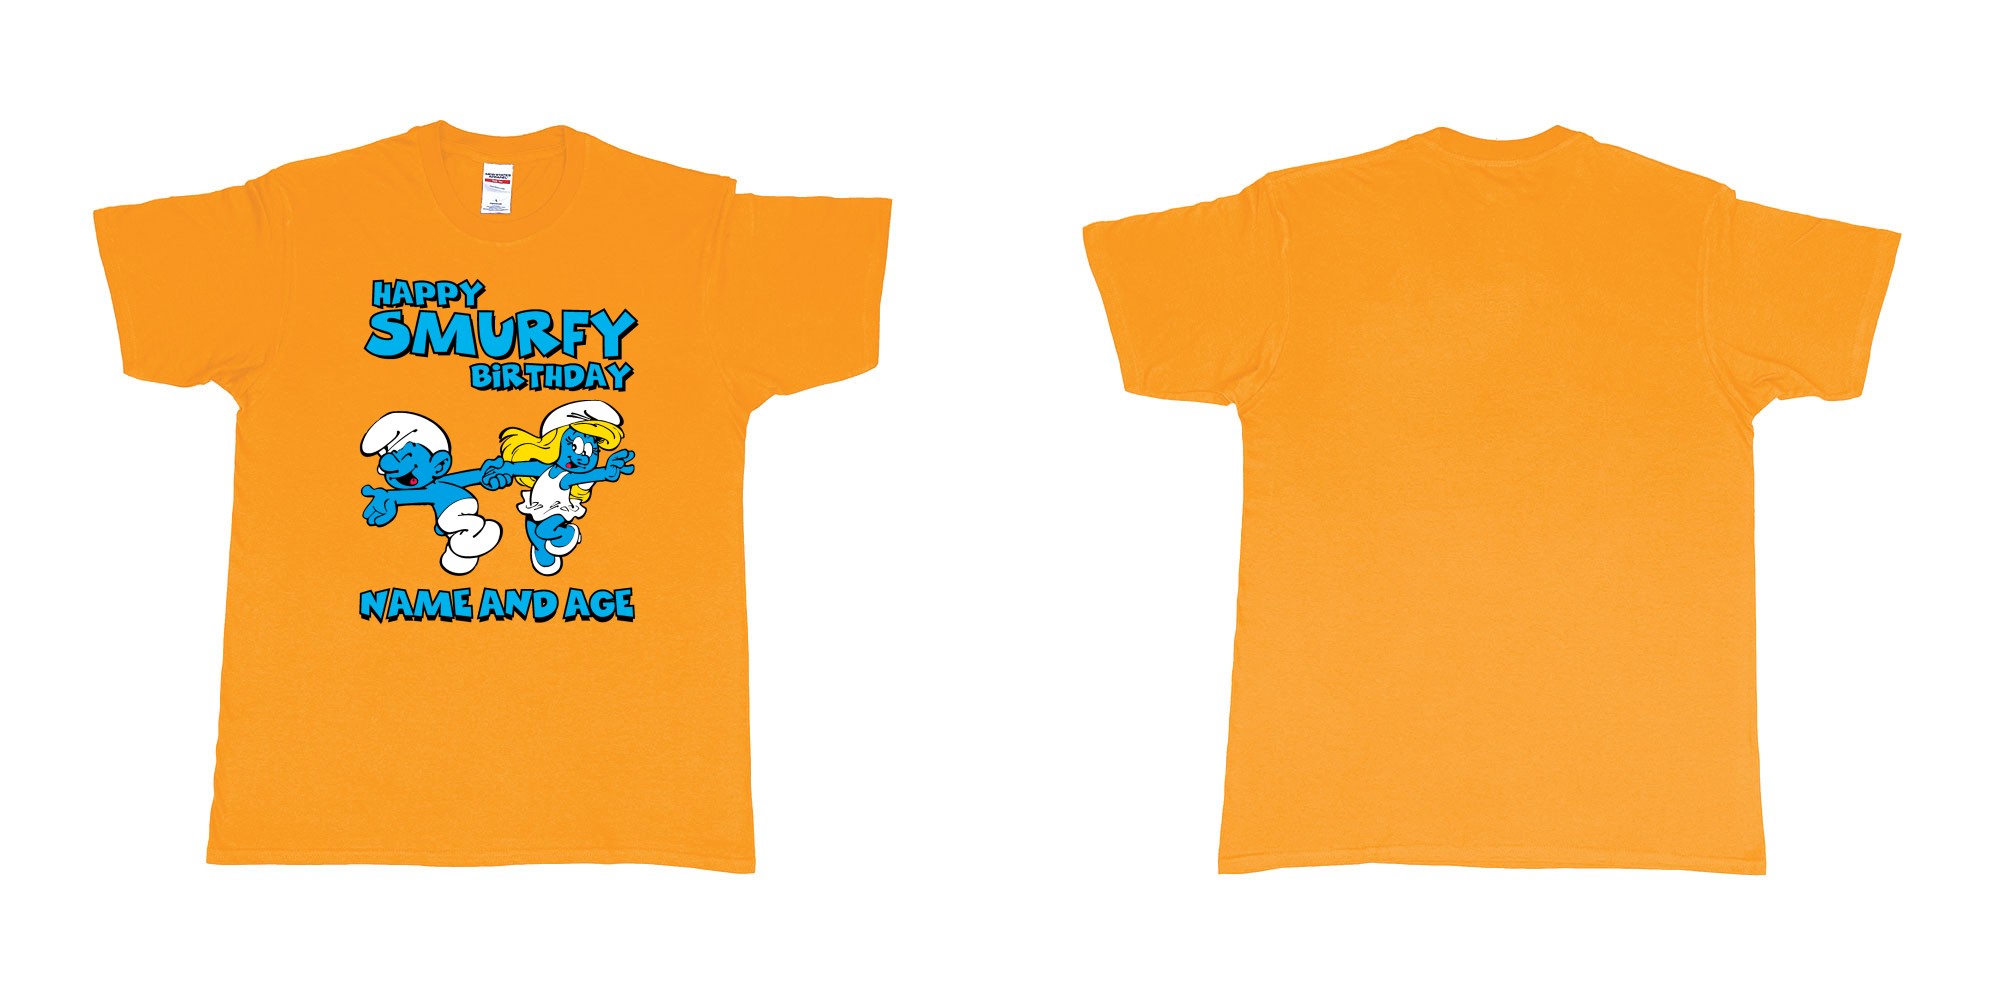 Custom tshirt design happy smurfy birthday in fabric color gold choice your own text made in Bali by The Pirate Way